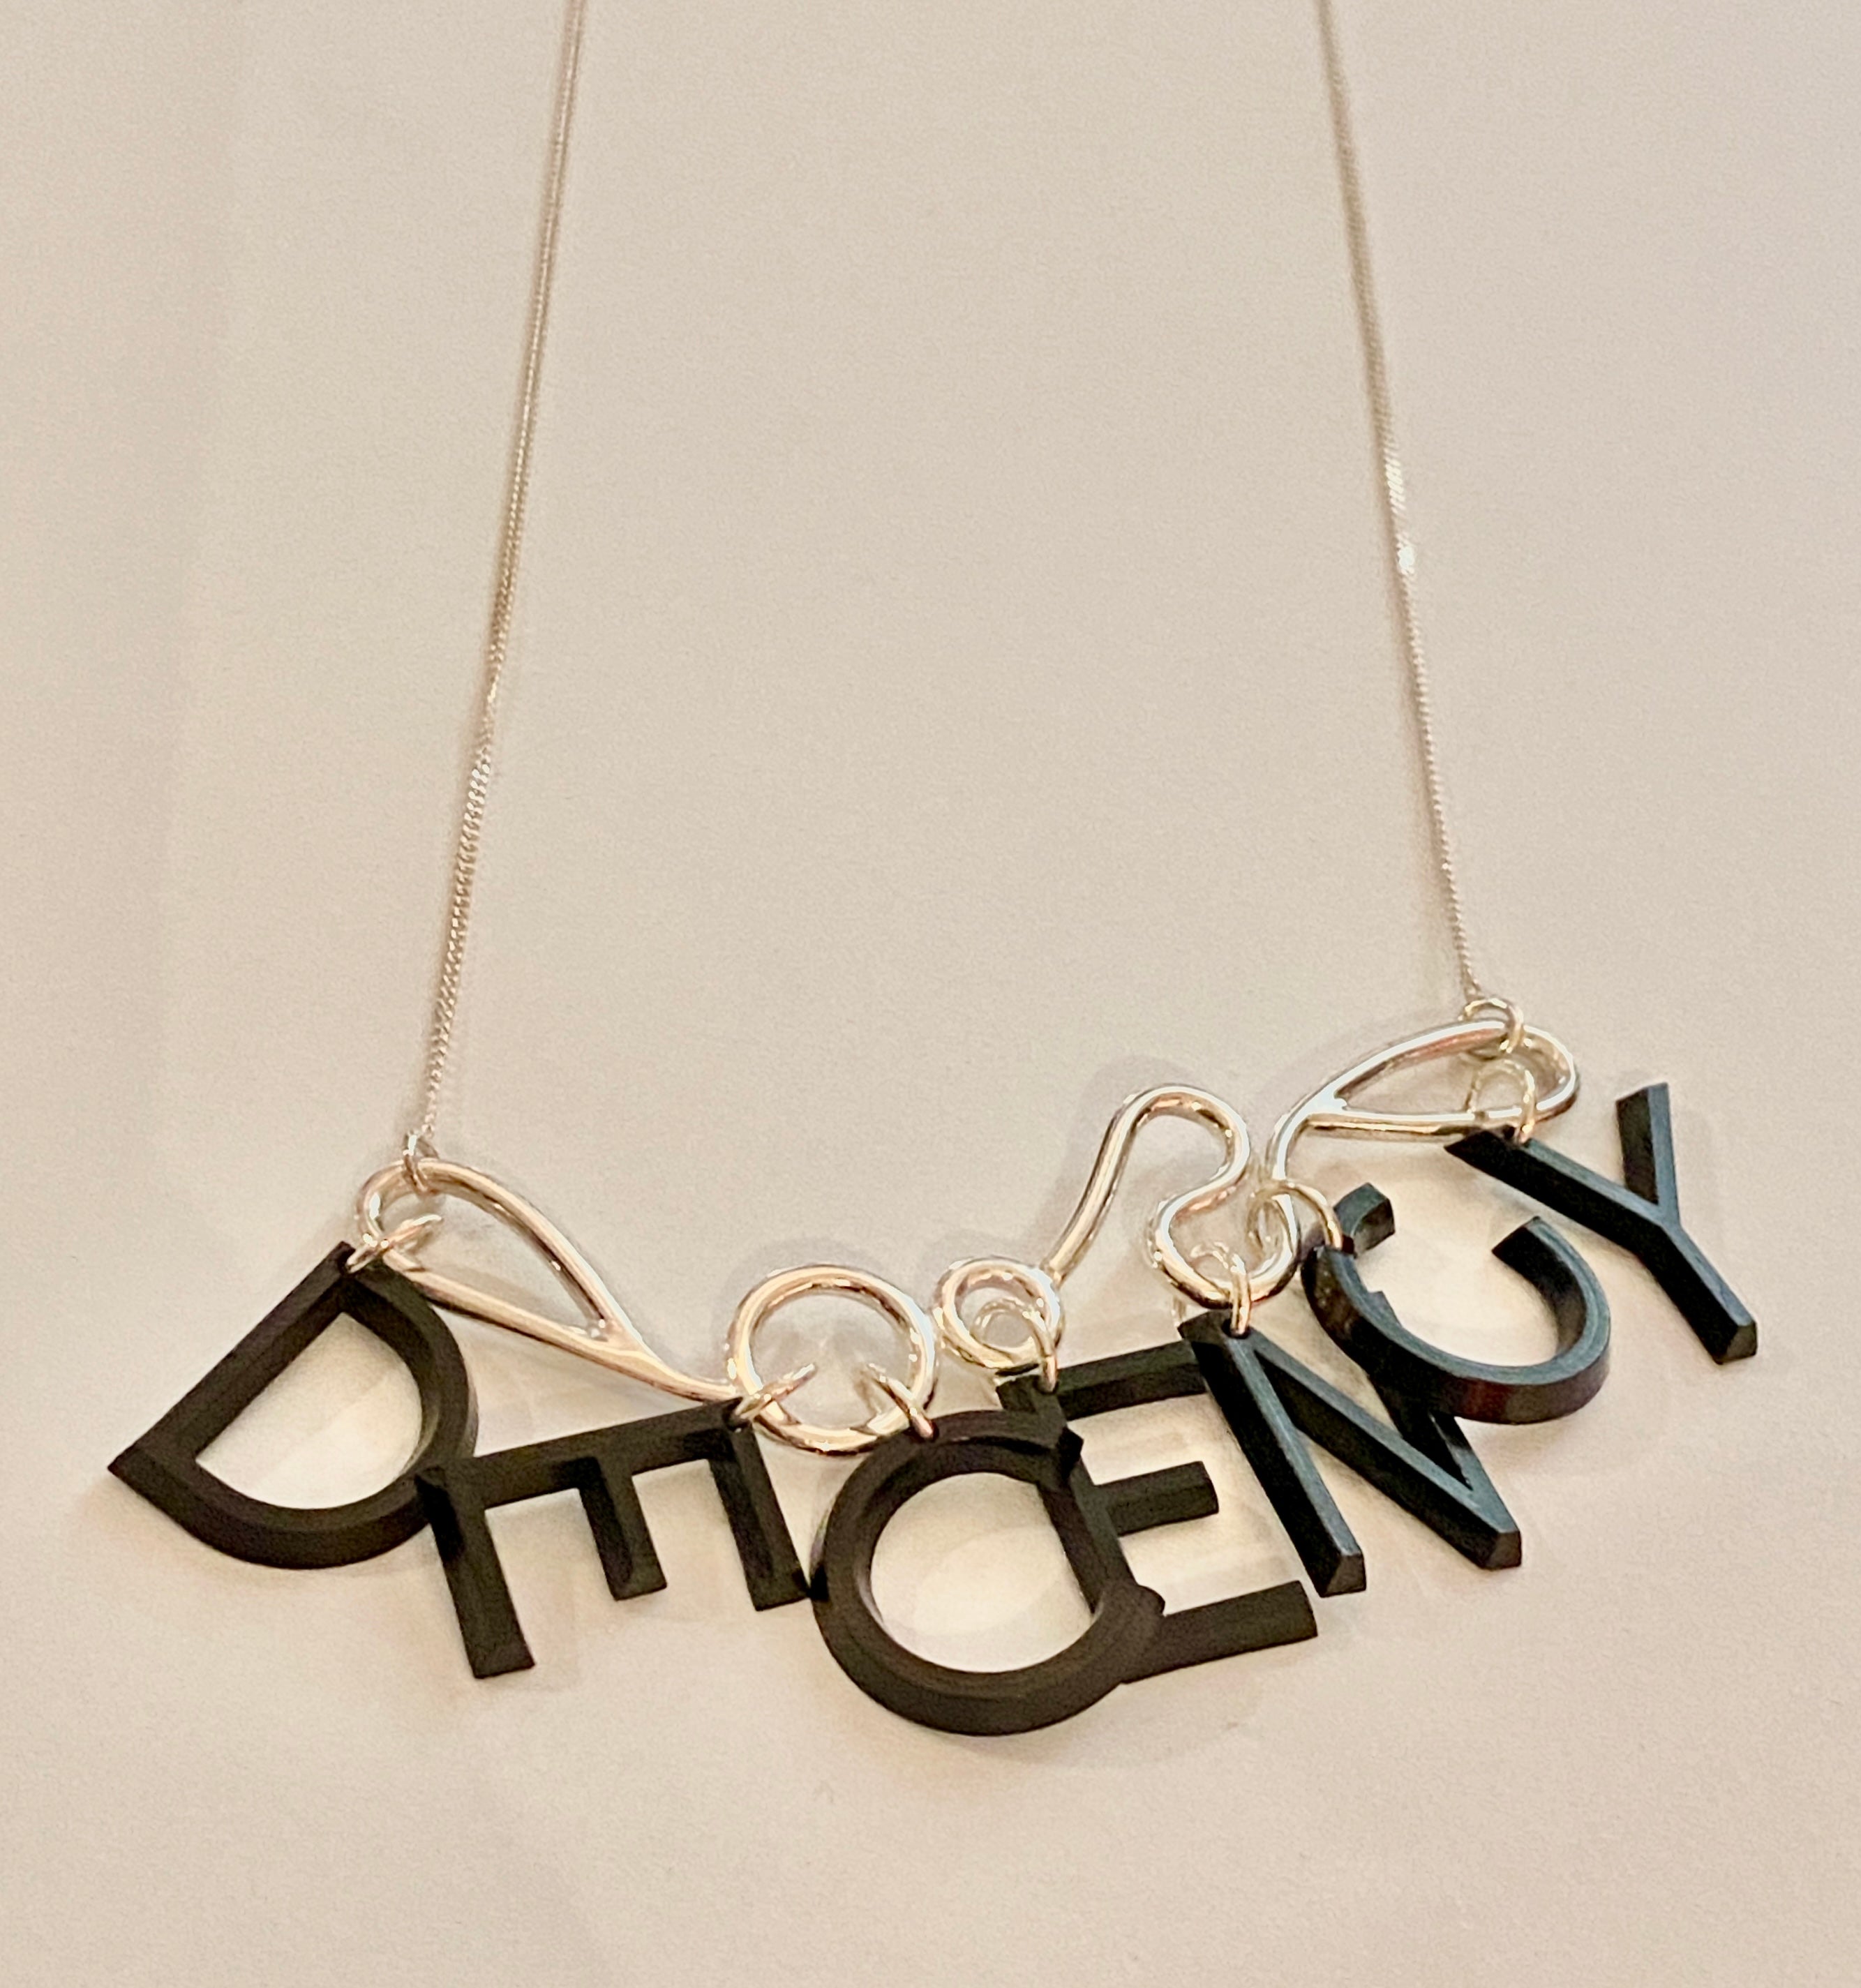 DECENCY silver and plastic necklace